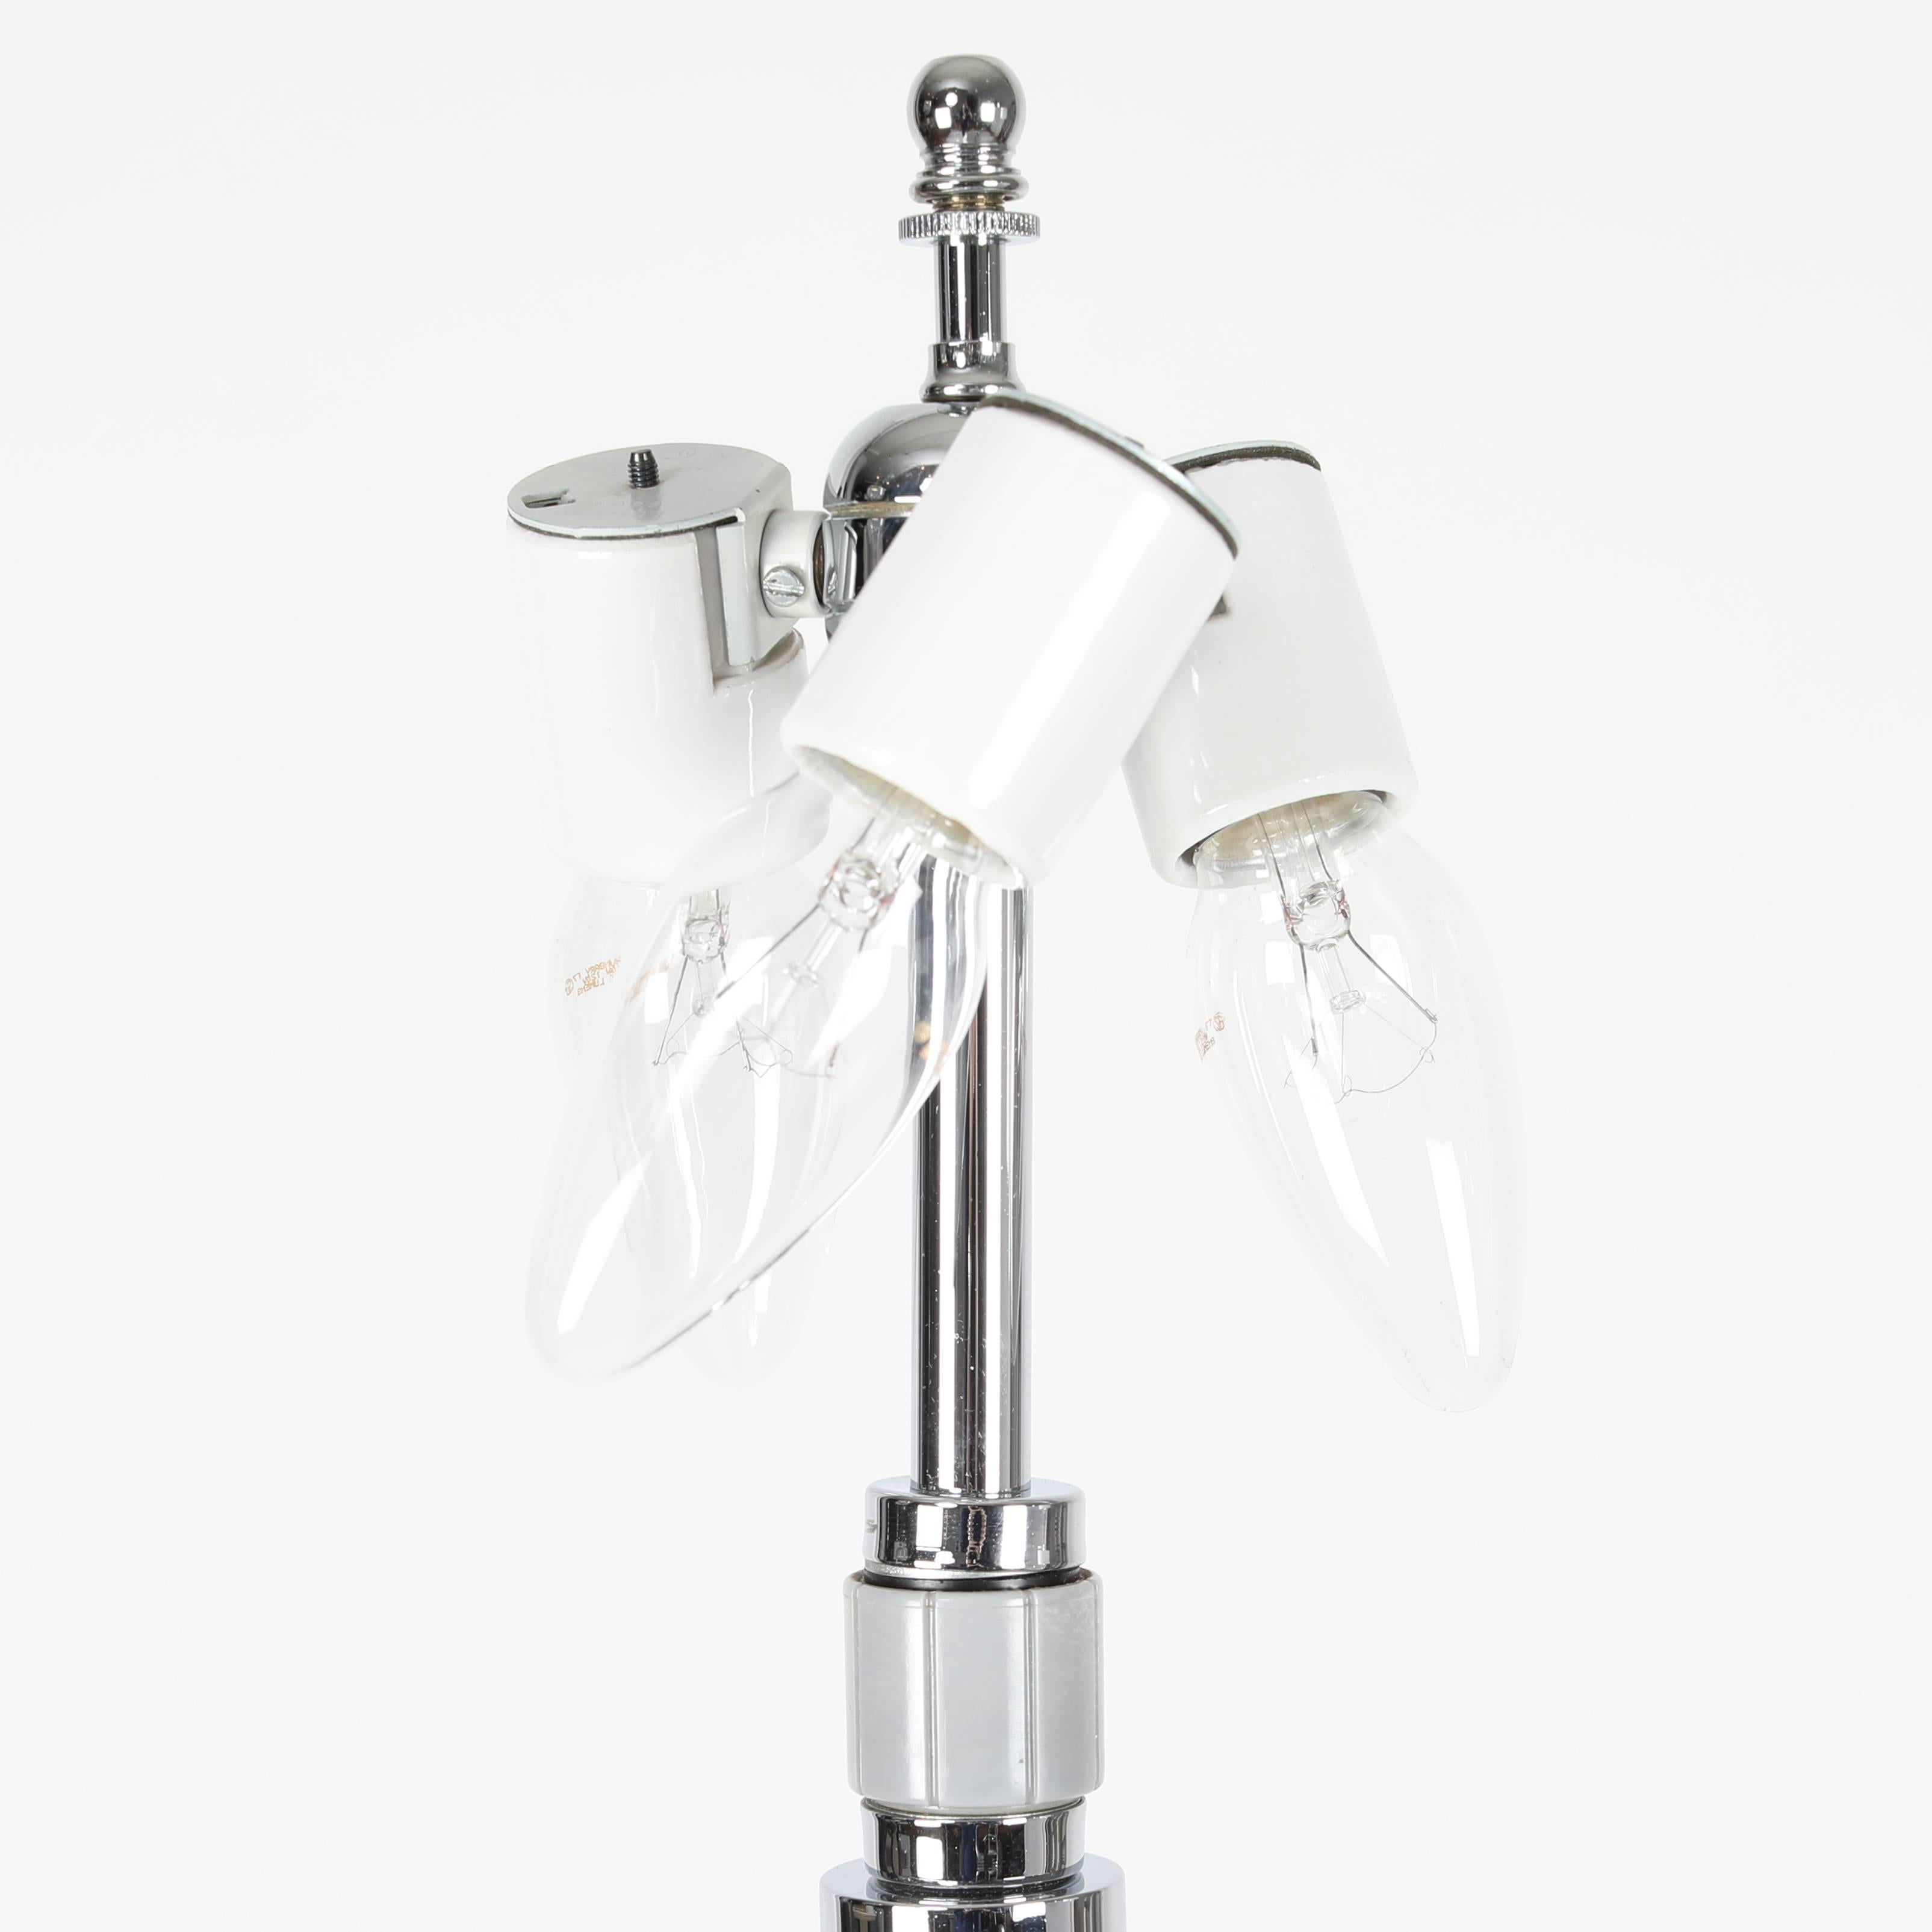 These simple and beautifully constructed floor lamps feature a single glass stem anchored by a square, weighted chrome base. Each lamp takes three standard-base bulbs. Plastic cuff on neck acts as a three-way switch and rotates to turn on one bulb,